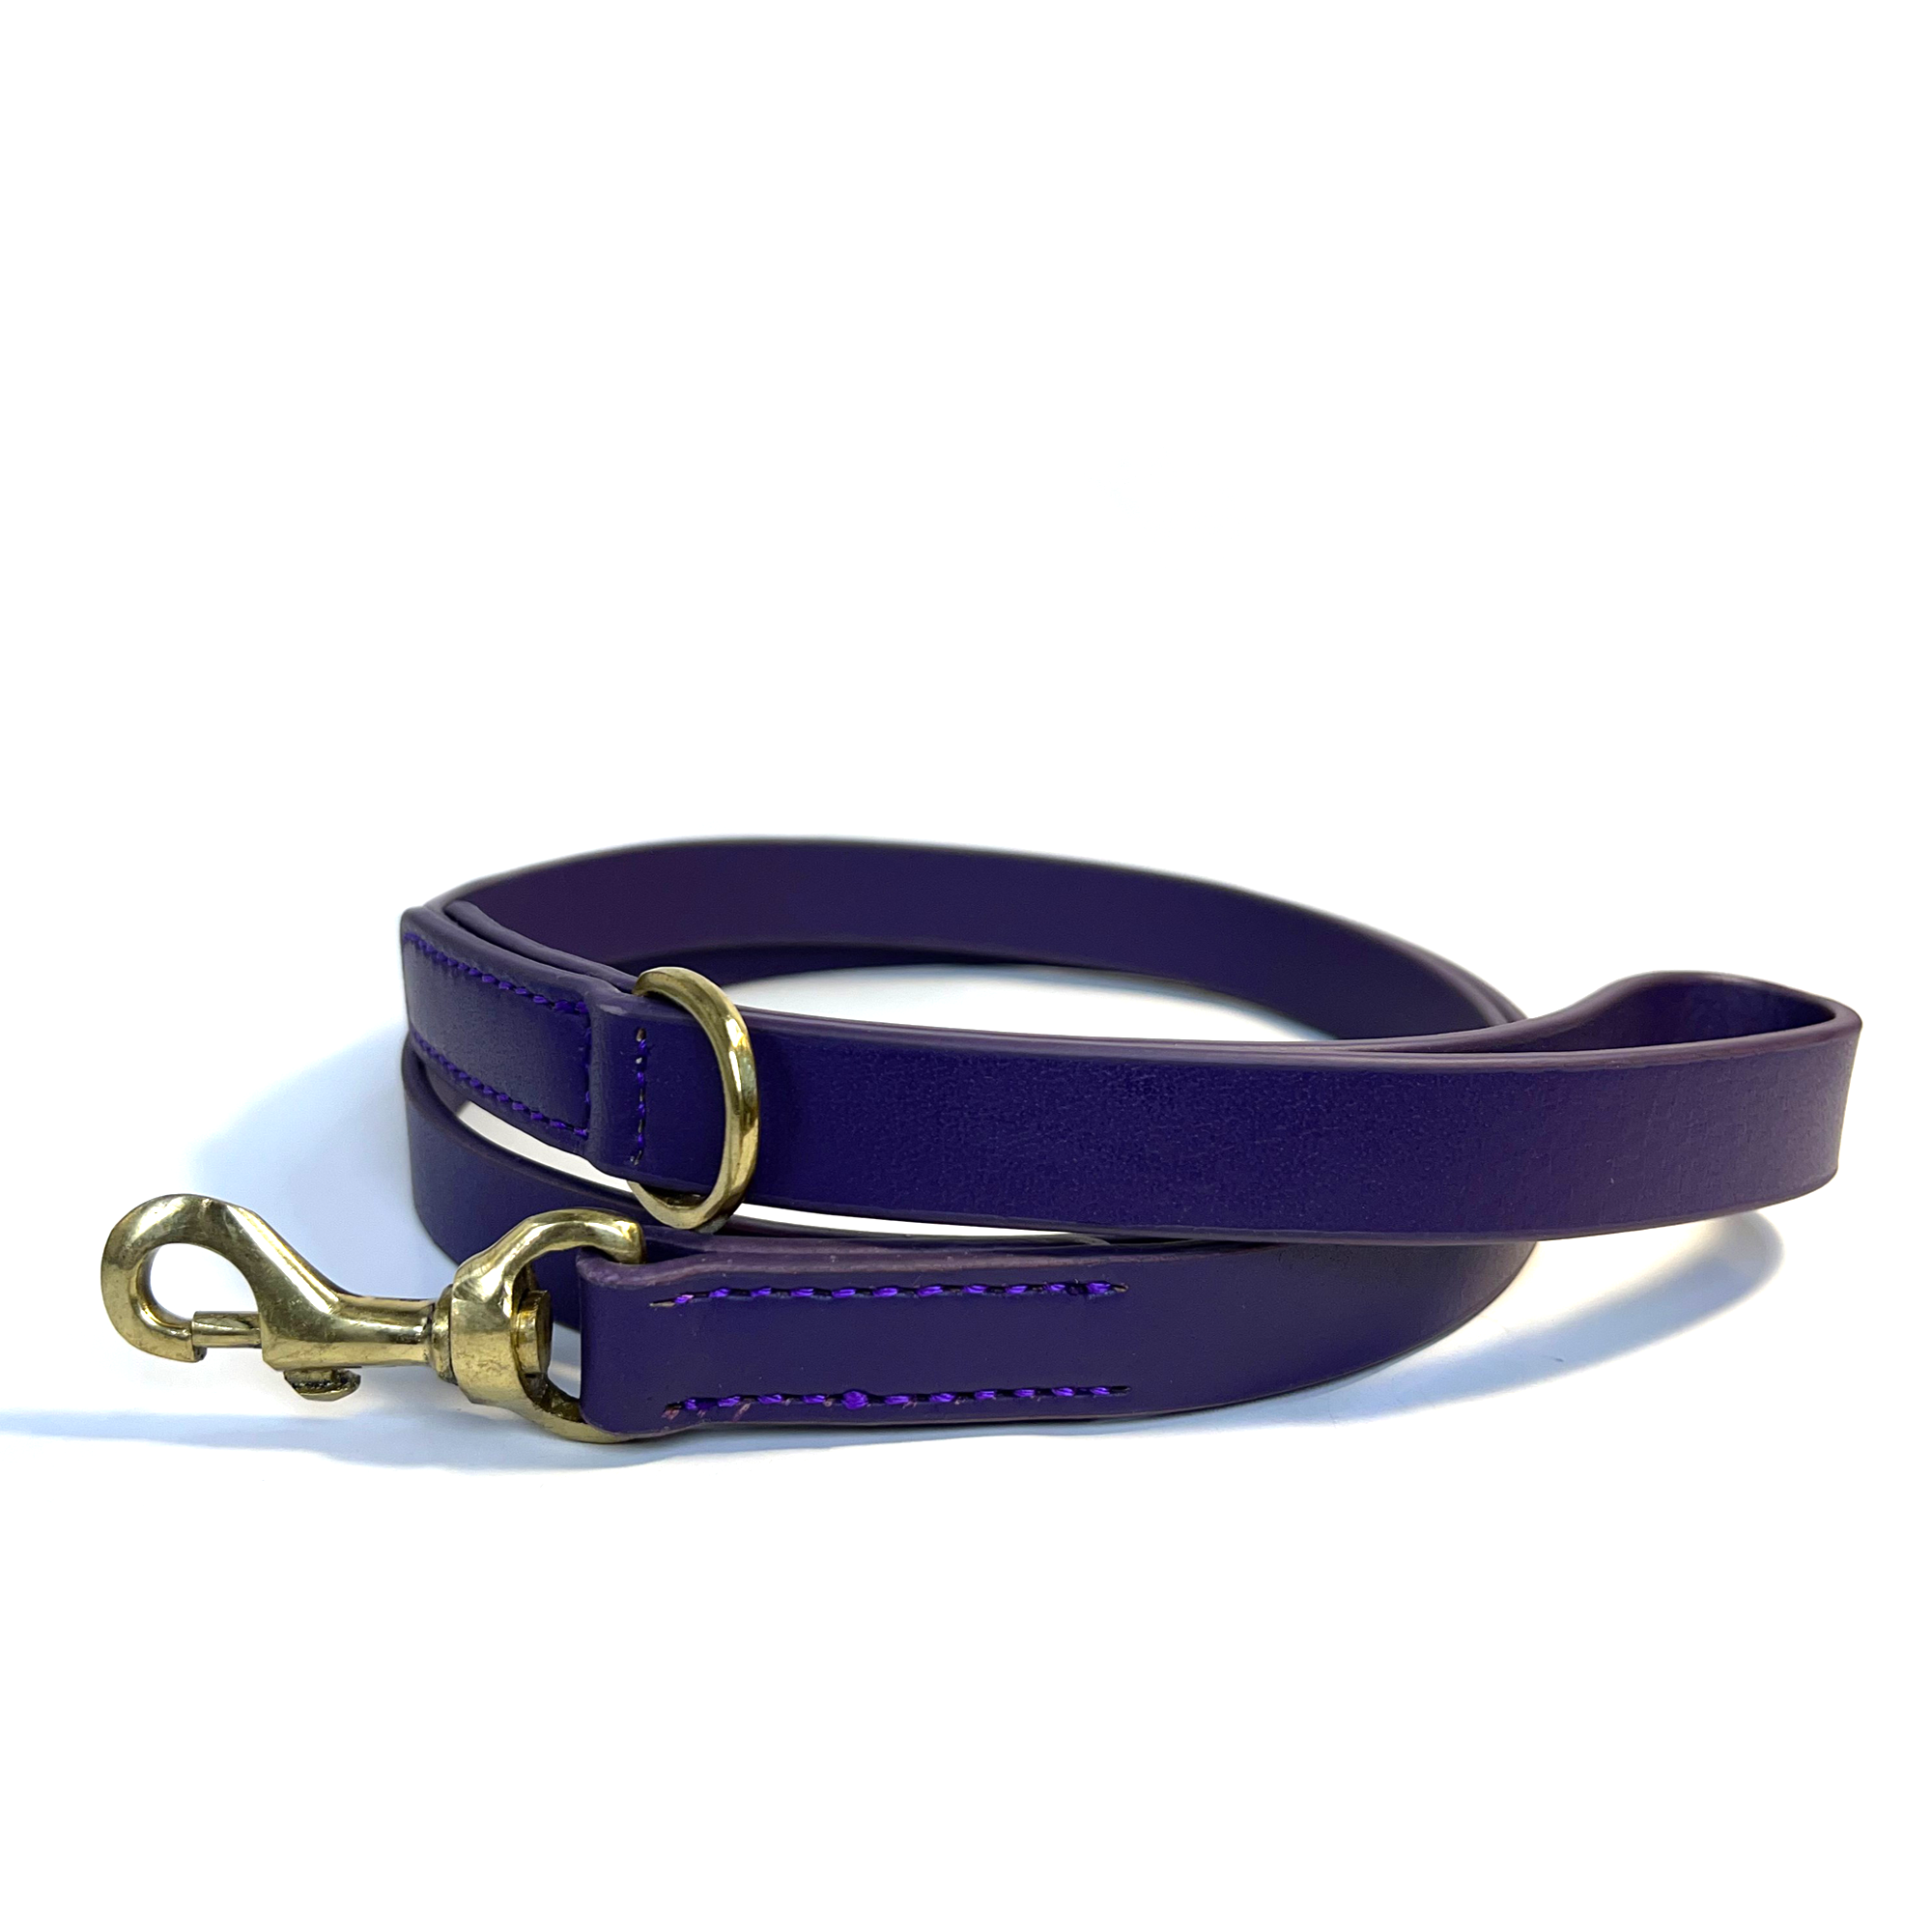 A Bald Lead Purple leather dog leash with antique brass hardware and stitching, coiled against a white background, designed for walking pets by Georgie Paws.